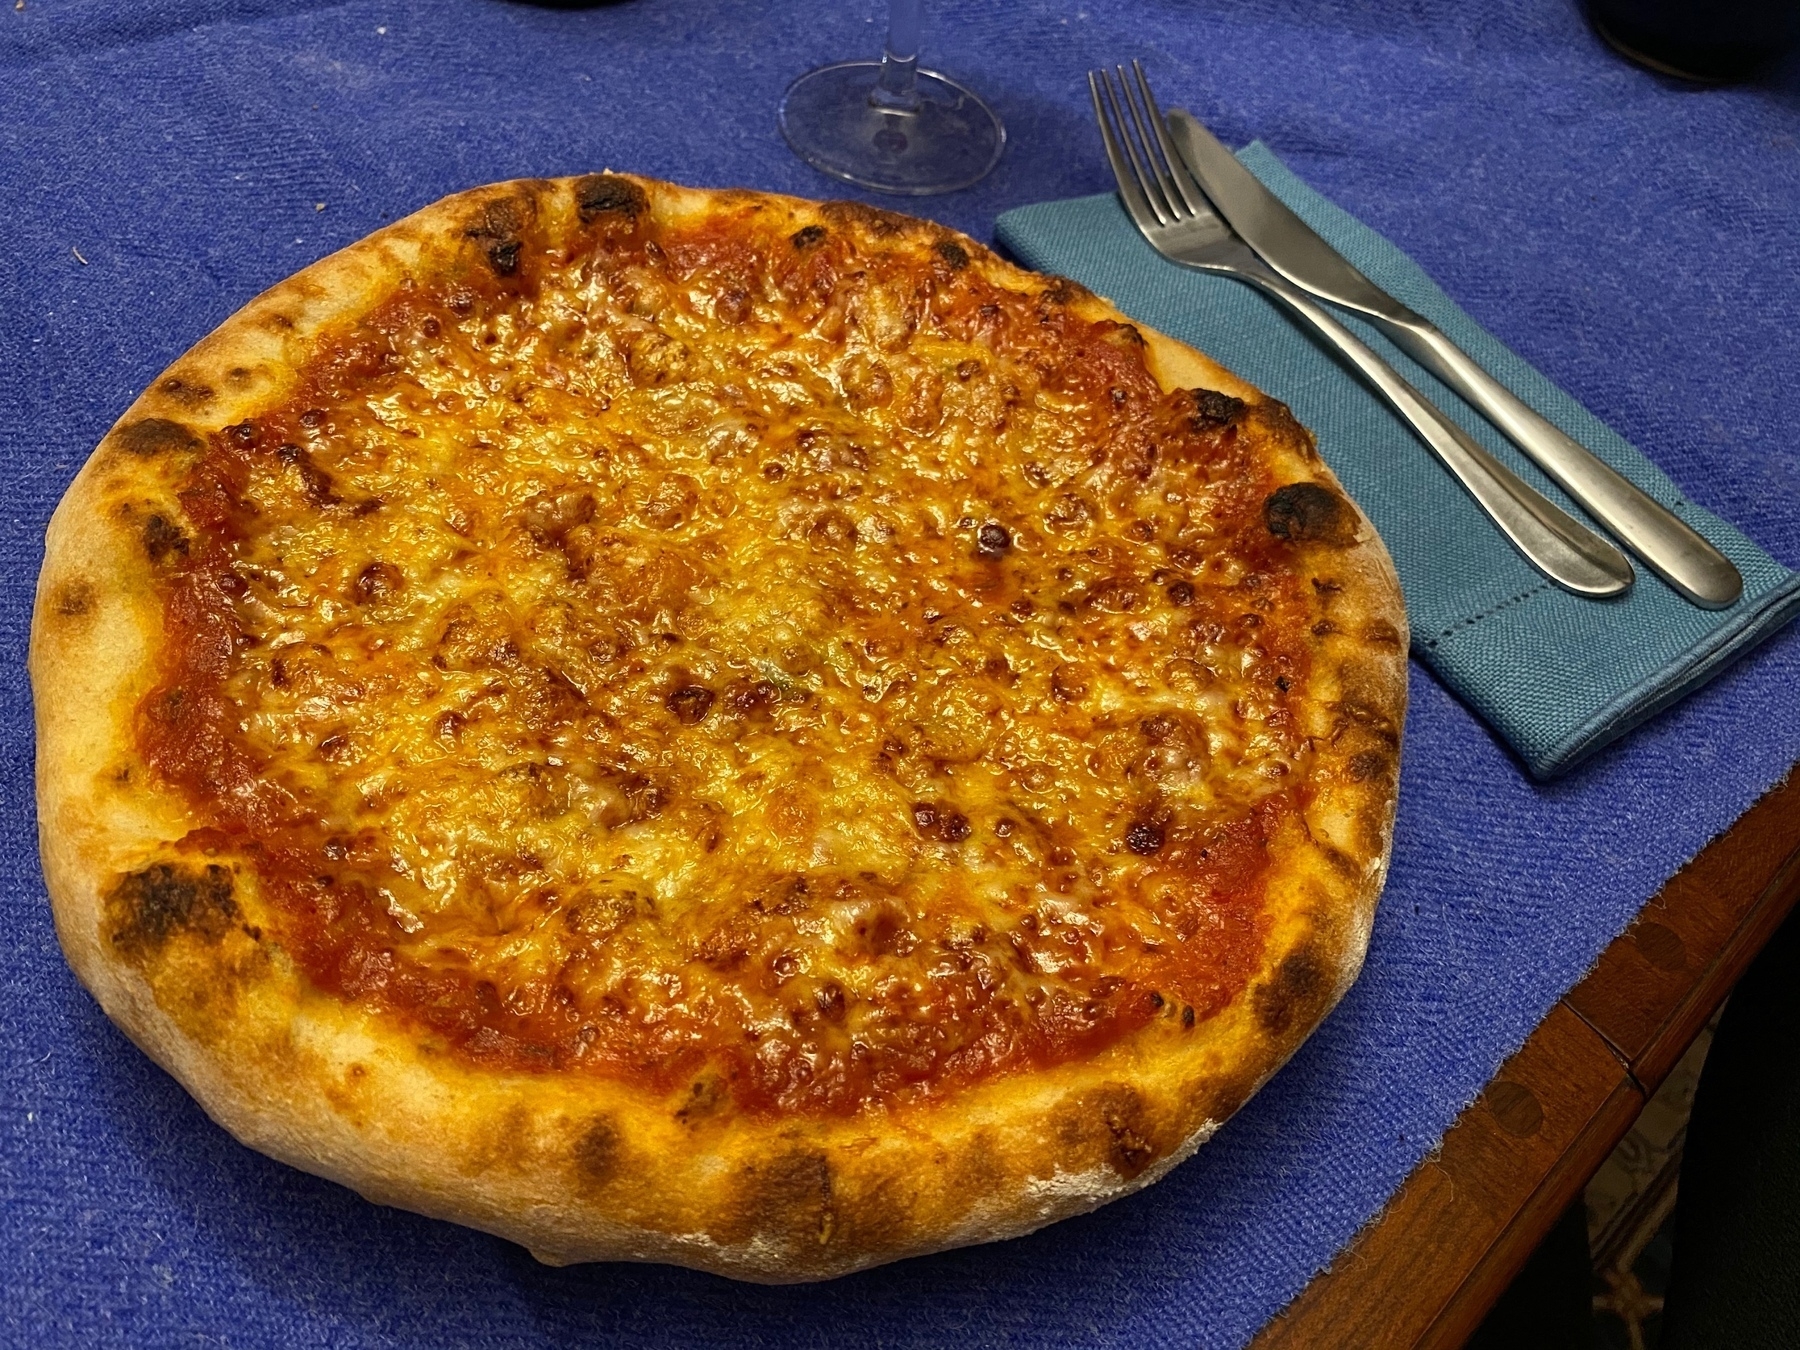 A small pizza on a plate next to a knife and fork.